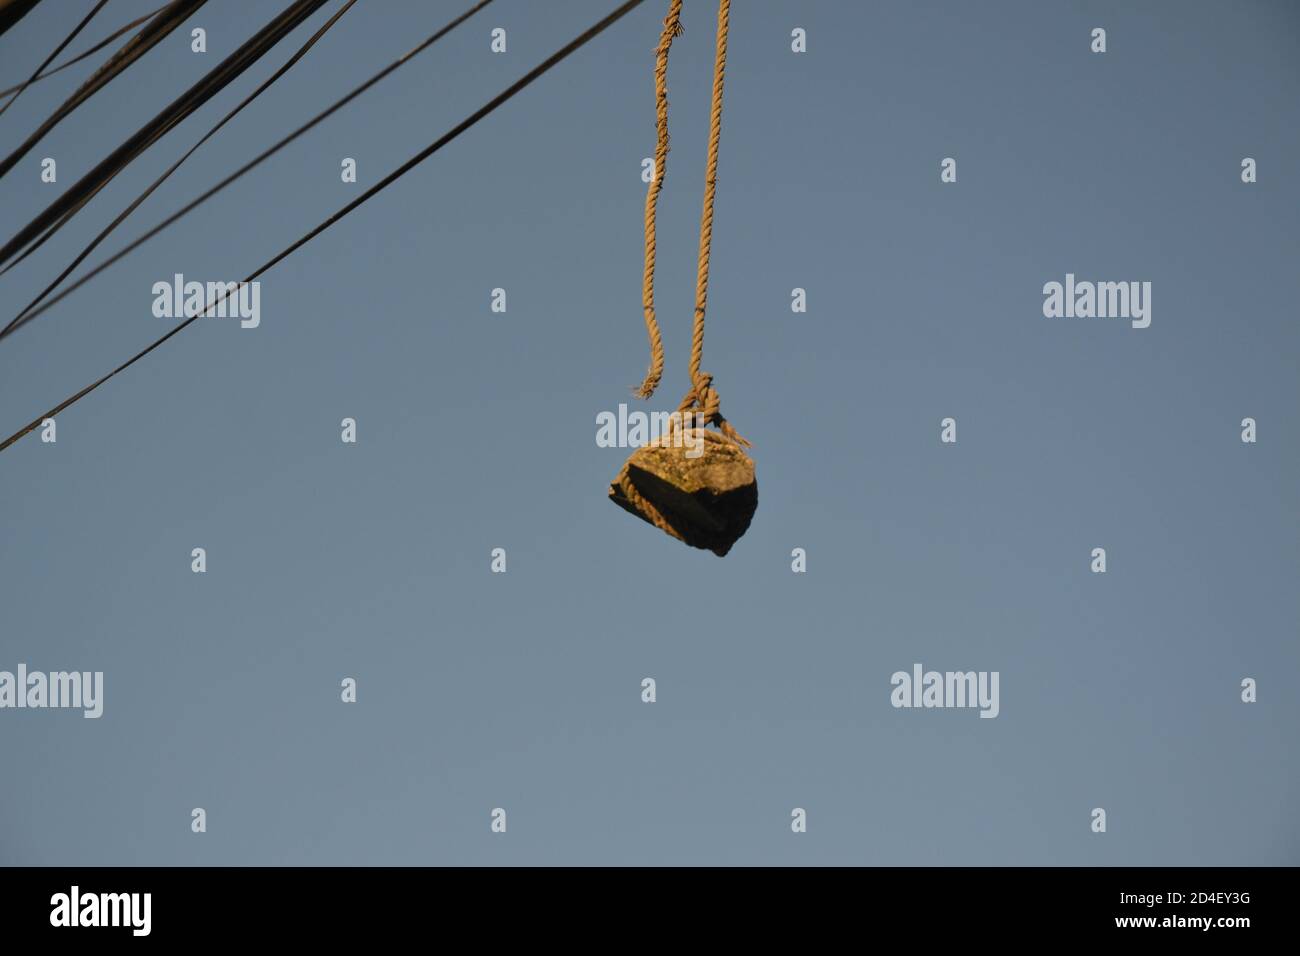 hanging stone on the electric wire for balancing of the wires. Picture taken in Kathmandu, Nepal Stock Photo